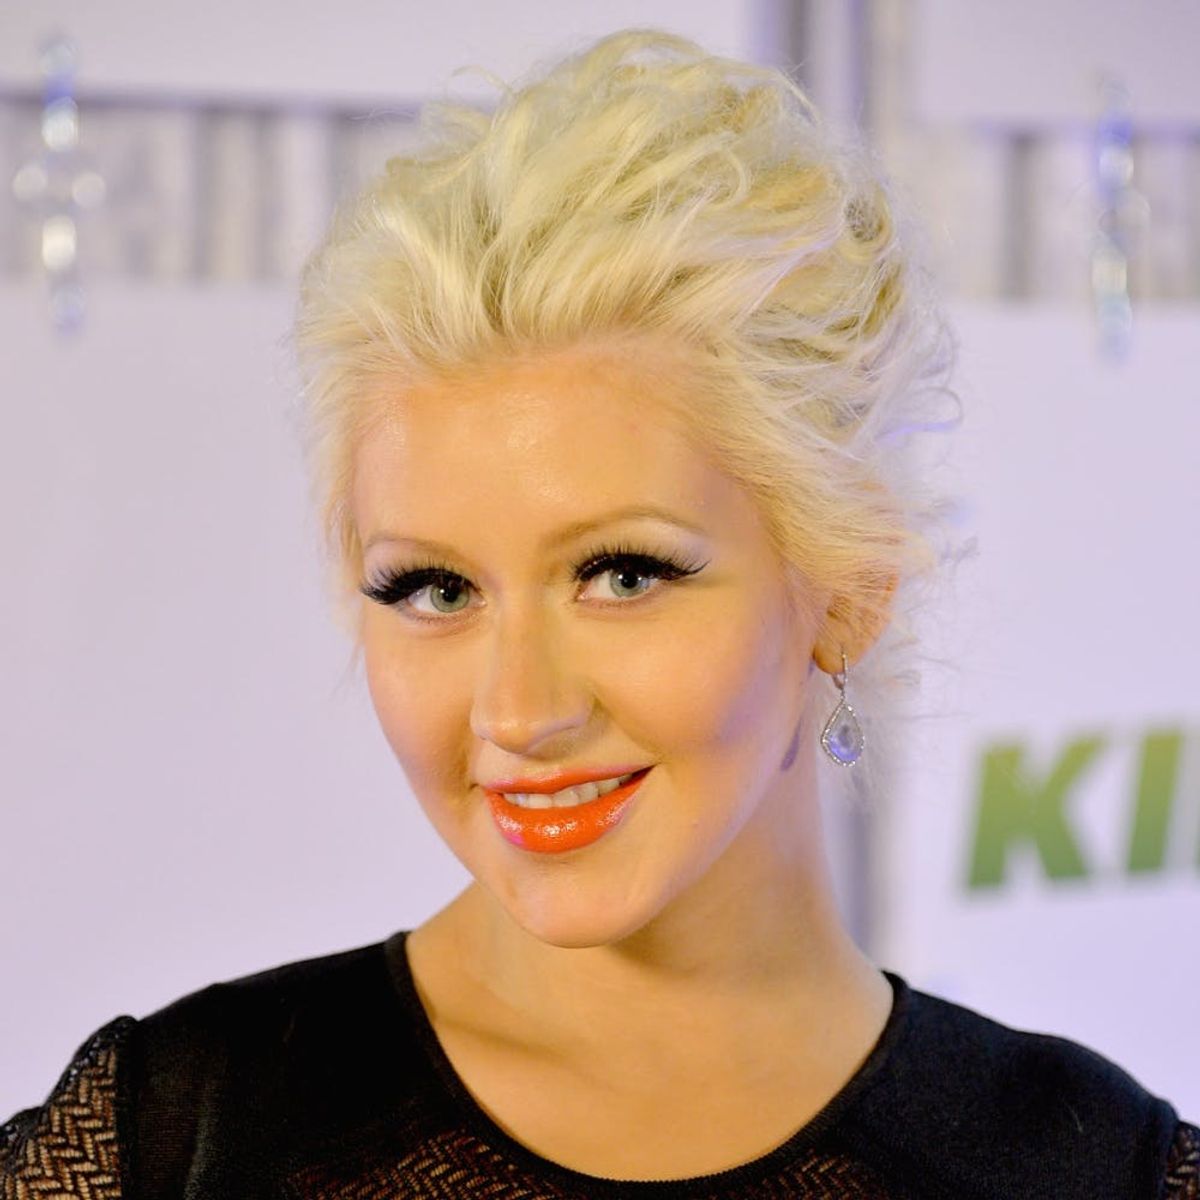 Christina Aguilera’s Latest Hairstyle Is Fabulously Floral